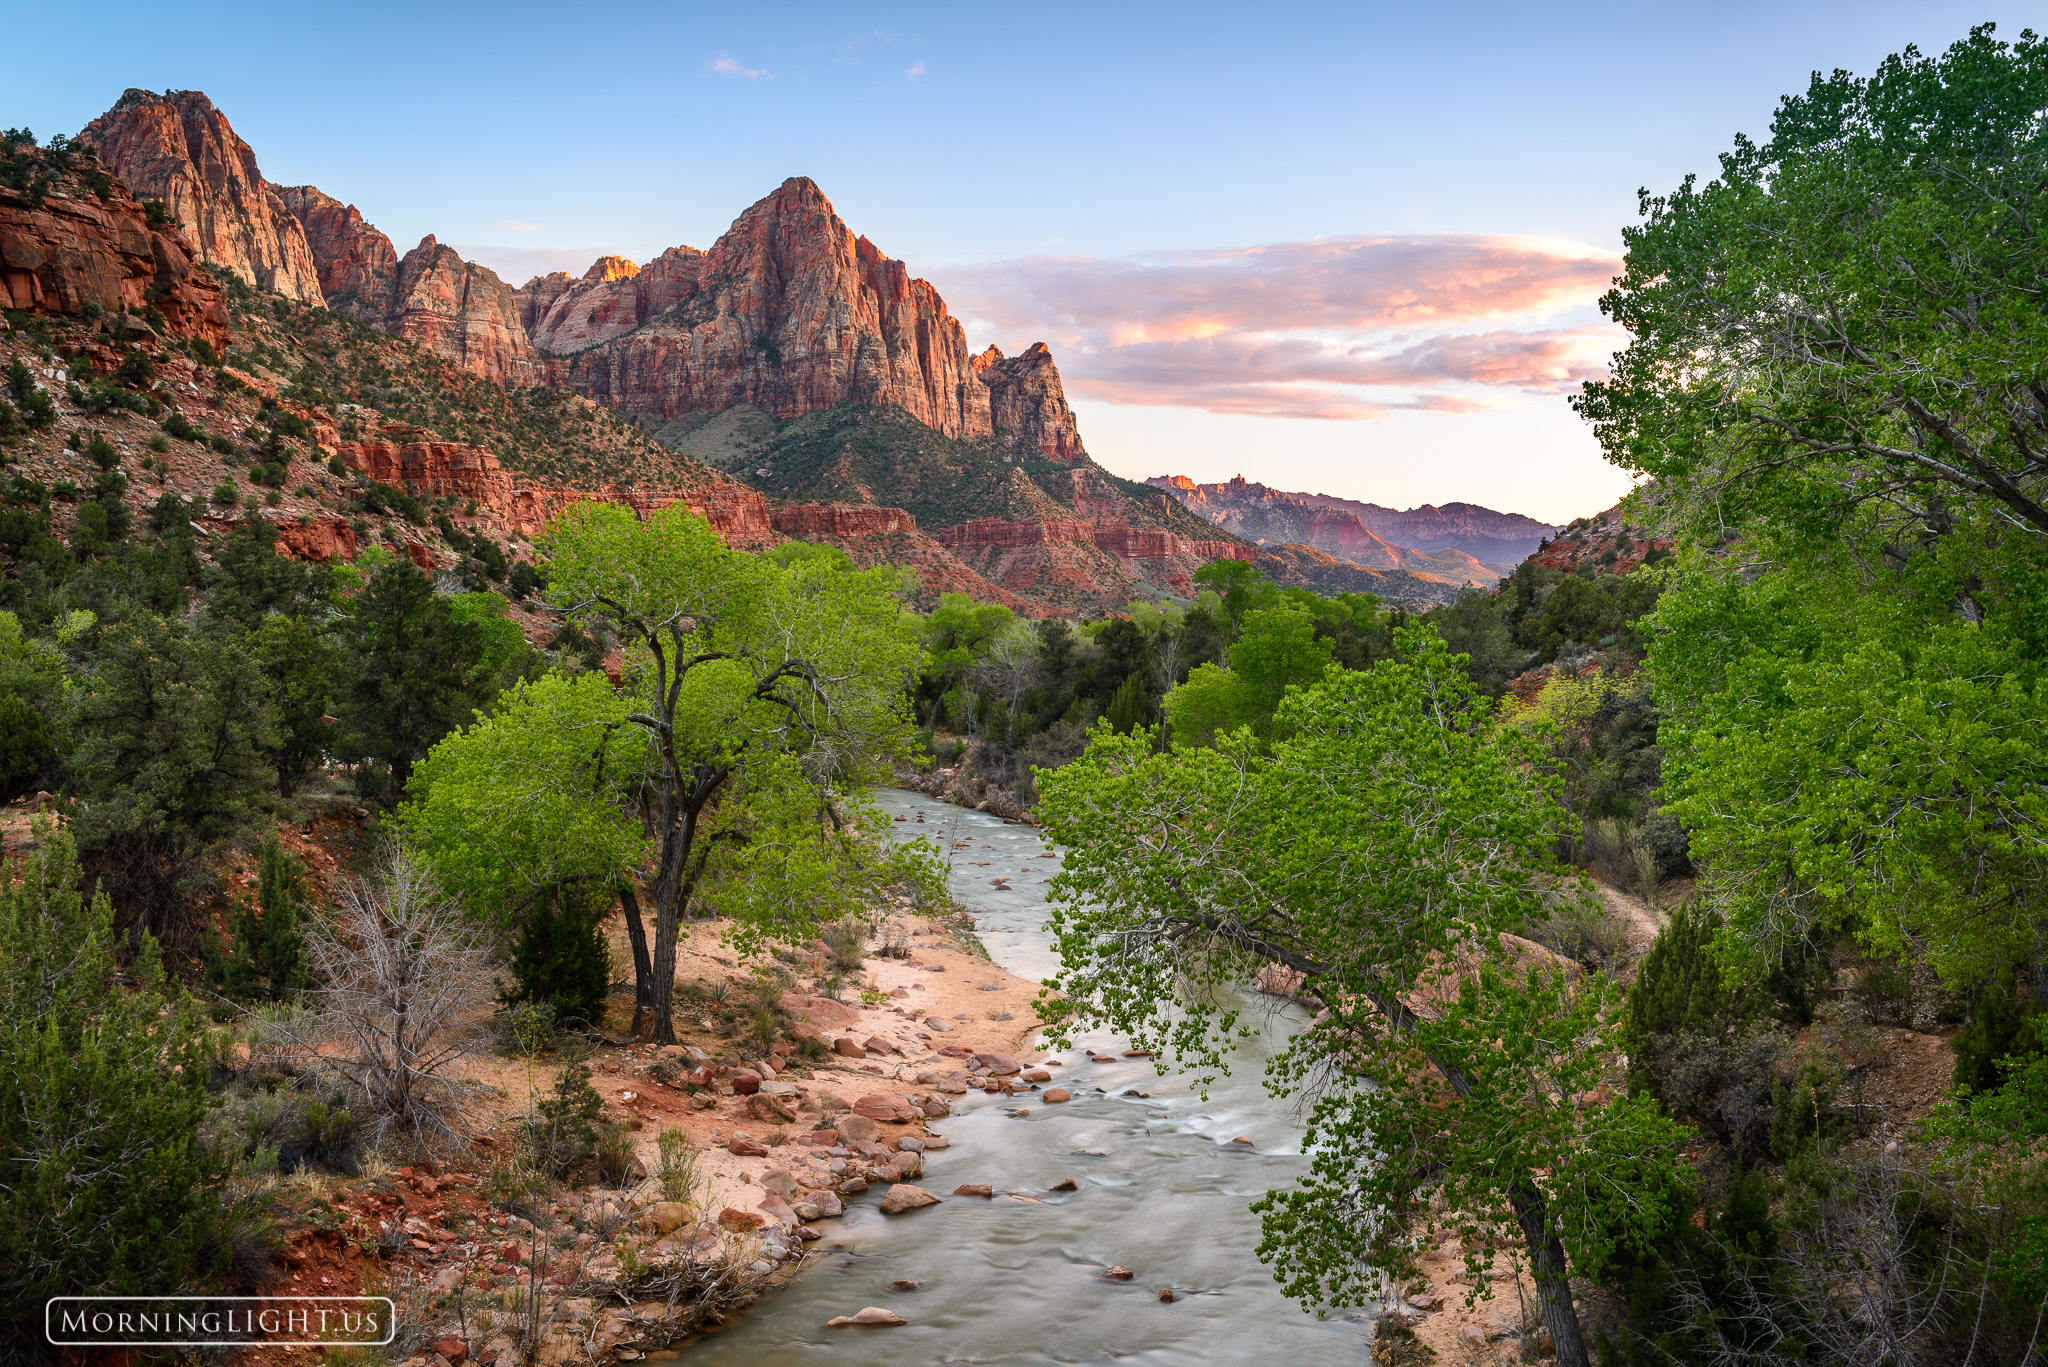 A beautiful spring sunset in Zion National Park. The mountain looking down over the Virgin River is known as the Watchman and...